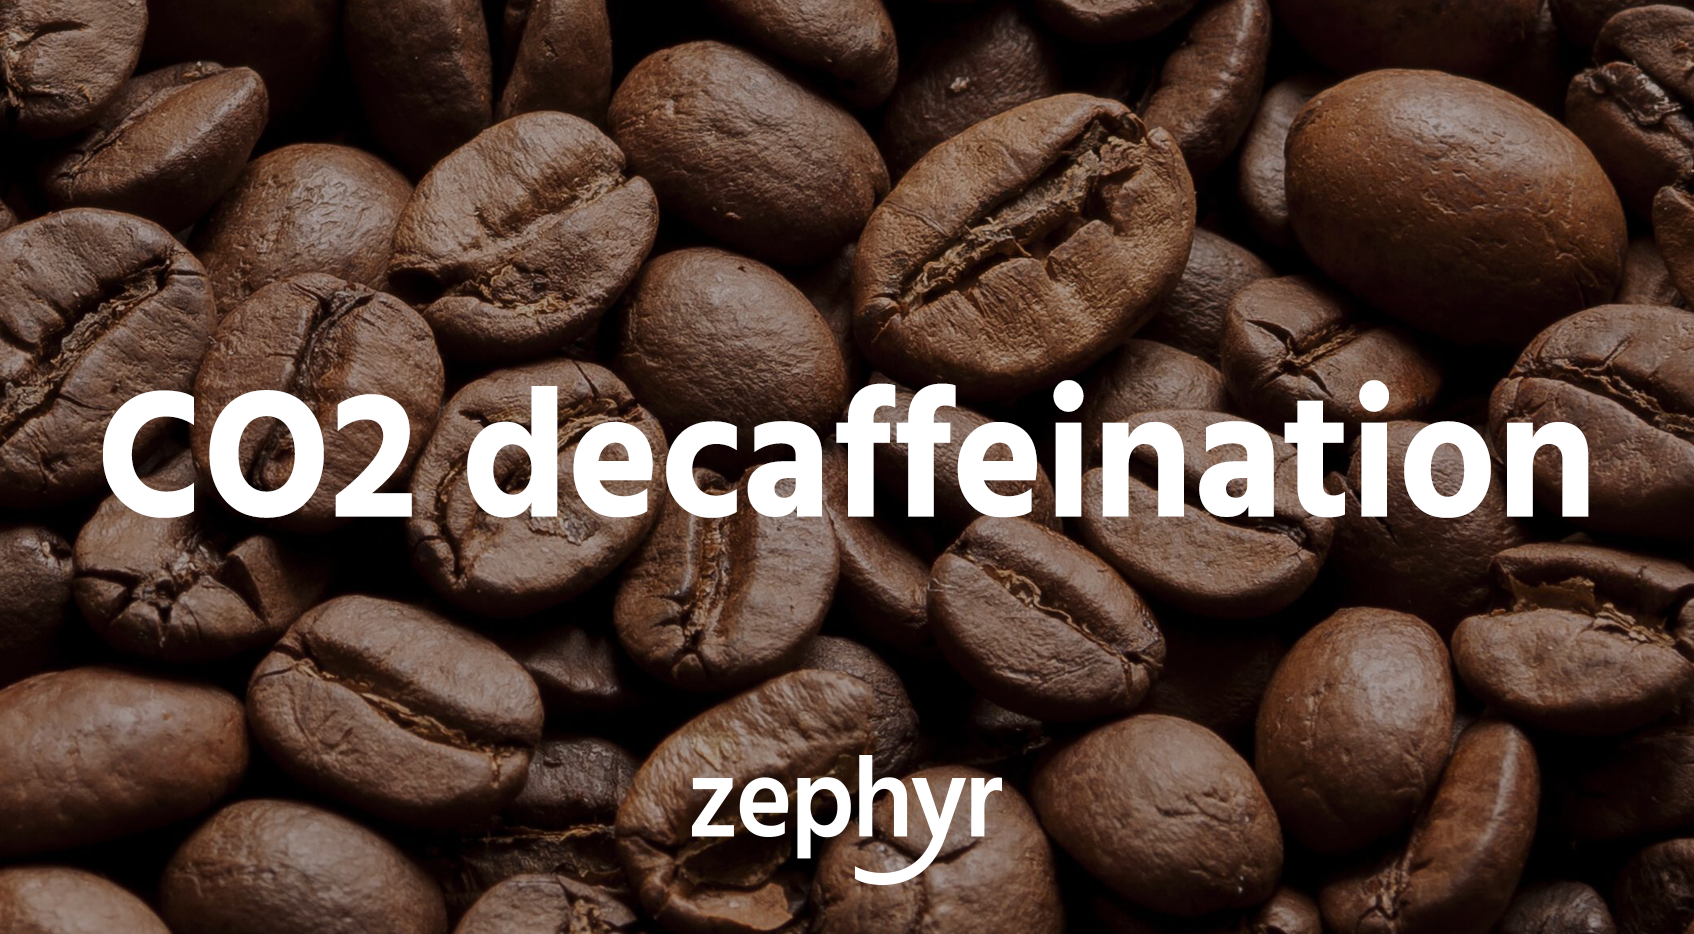 CO2 decaffeination — A decaf coffee without chemicals